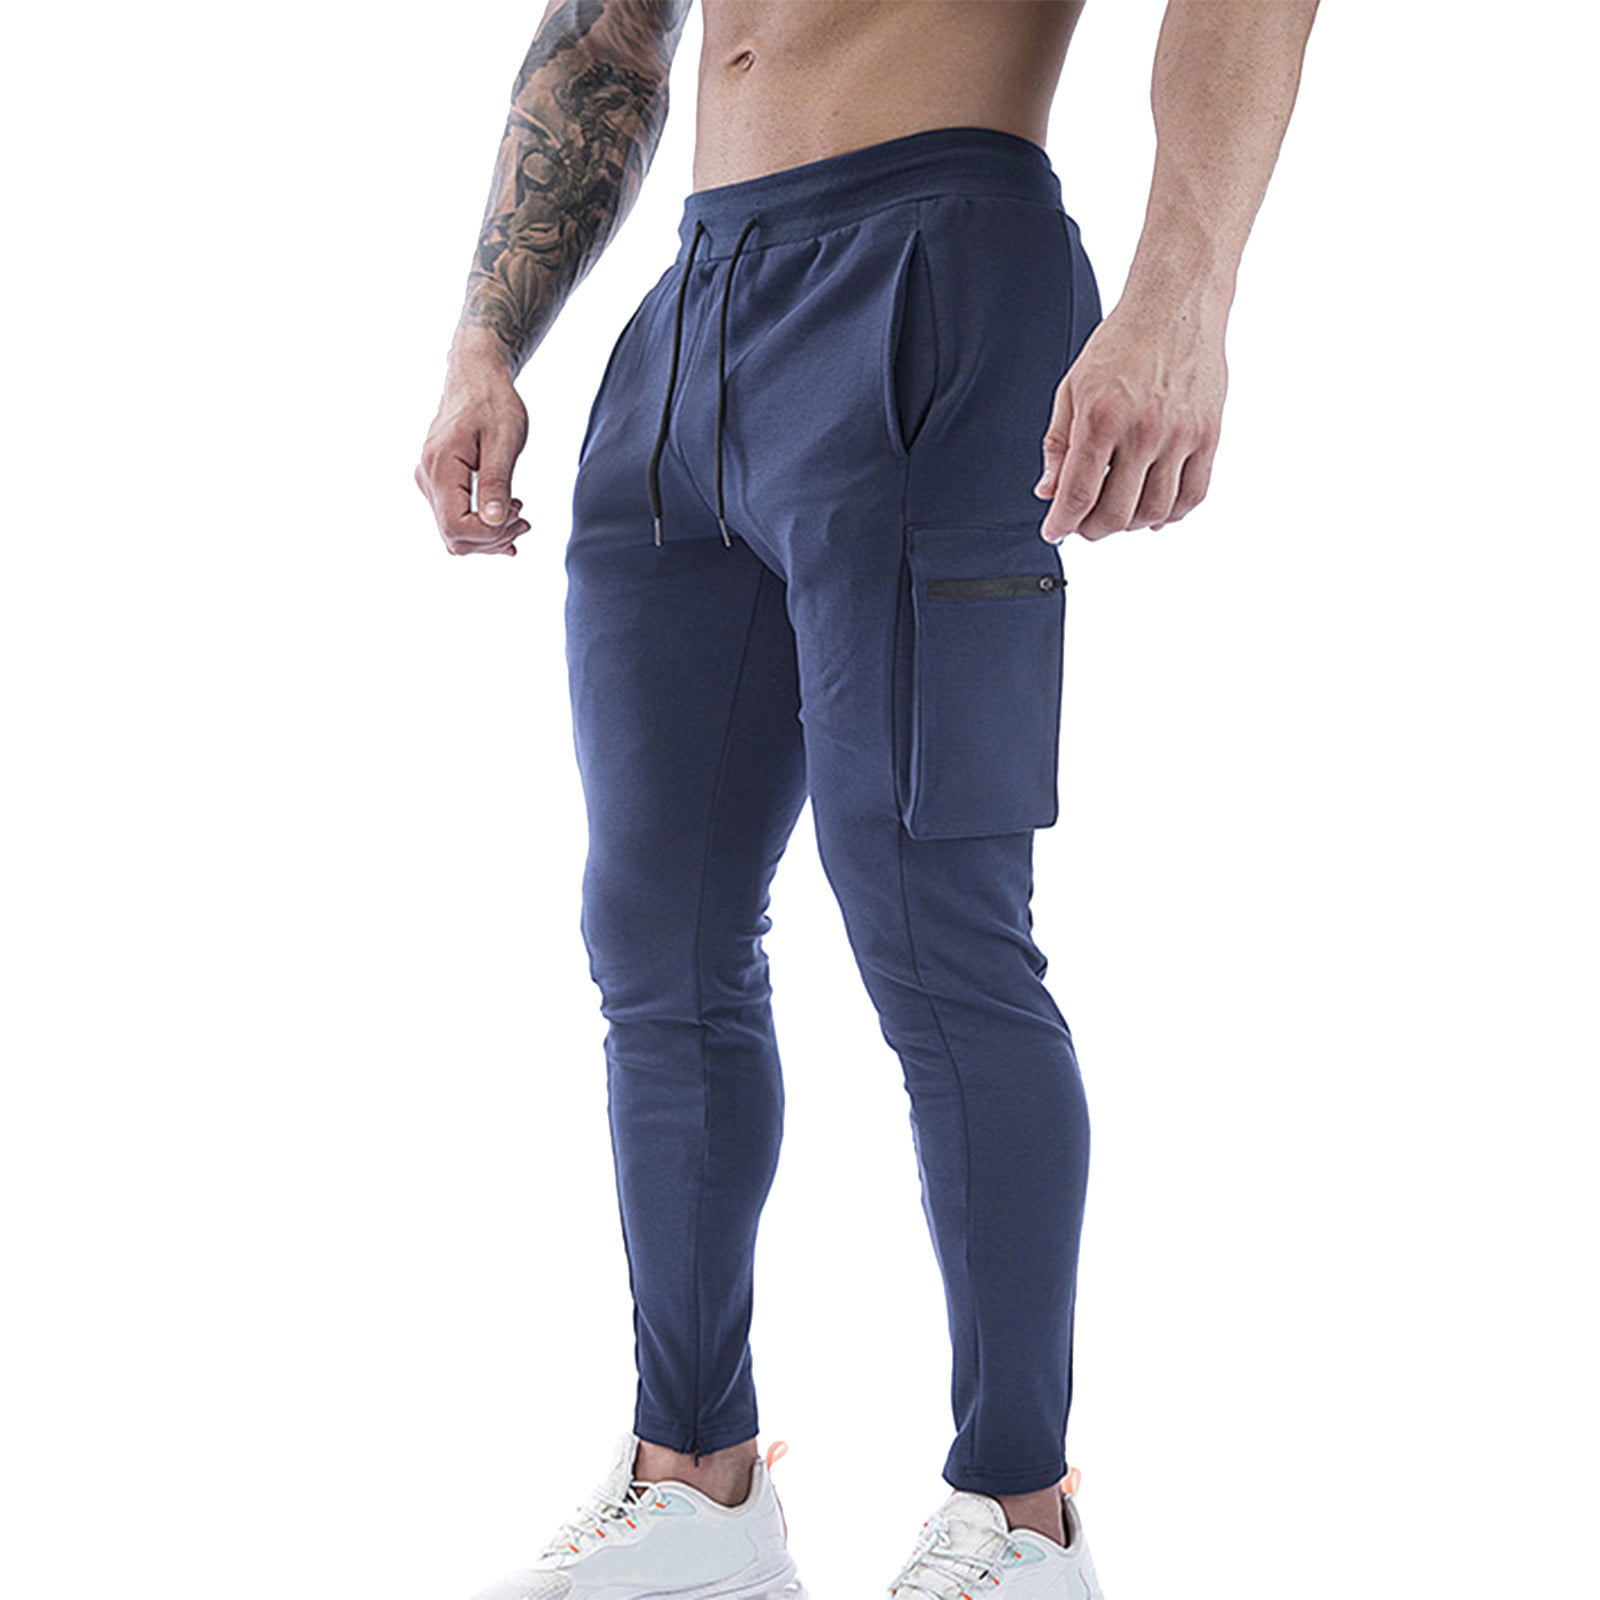 Men's Track Pants Online: Low Price Offer on Track Pants for Men - AJIO-cheohanoi.vn